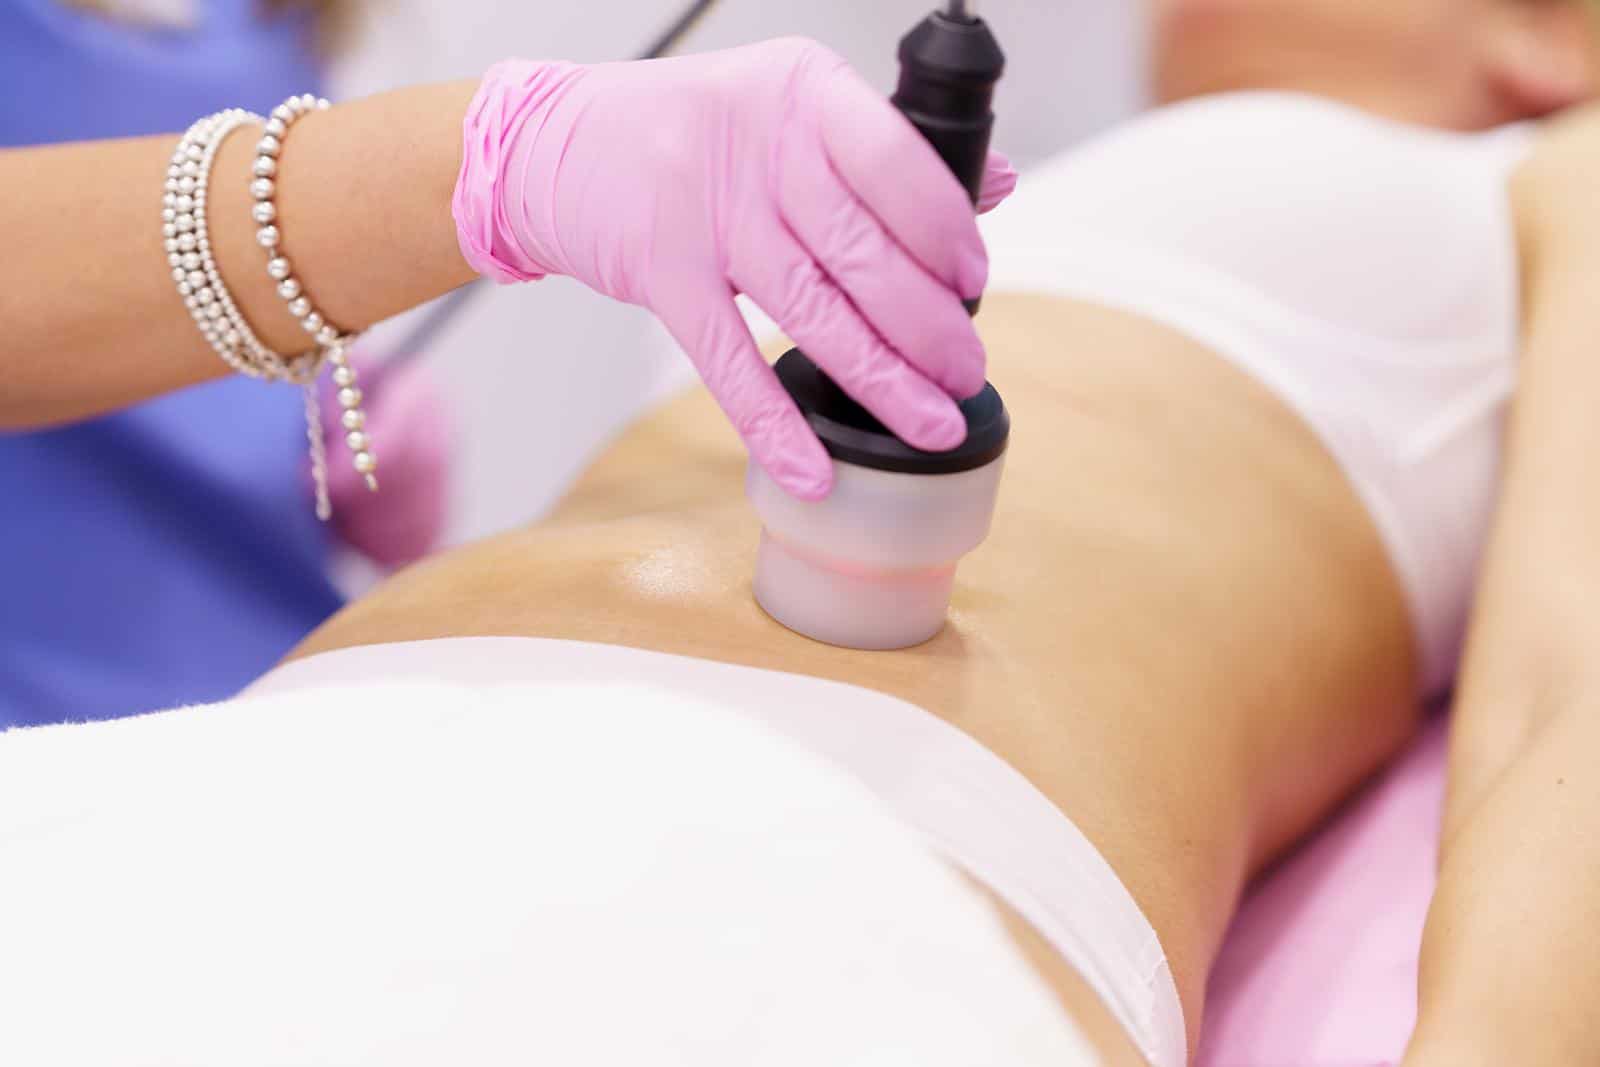 40241724 woman receiving anti cellulite treatment with radiofrequency machine in a beauty center